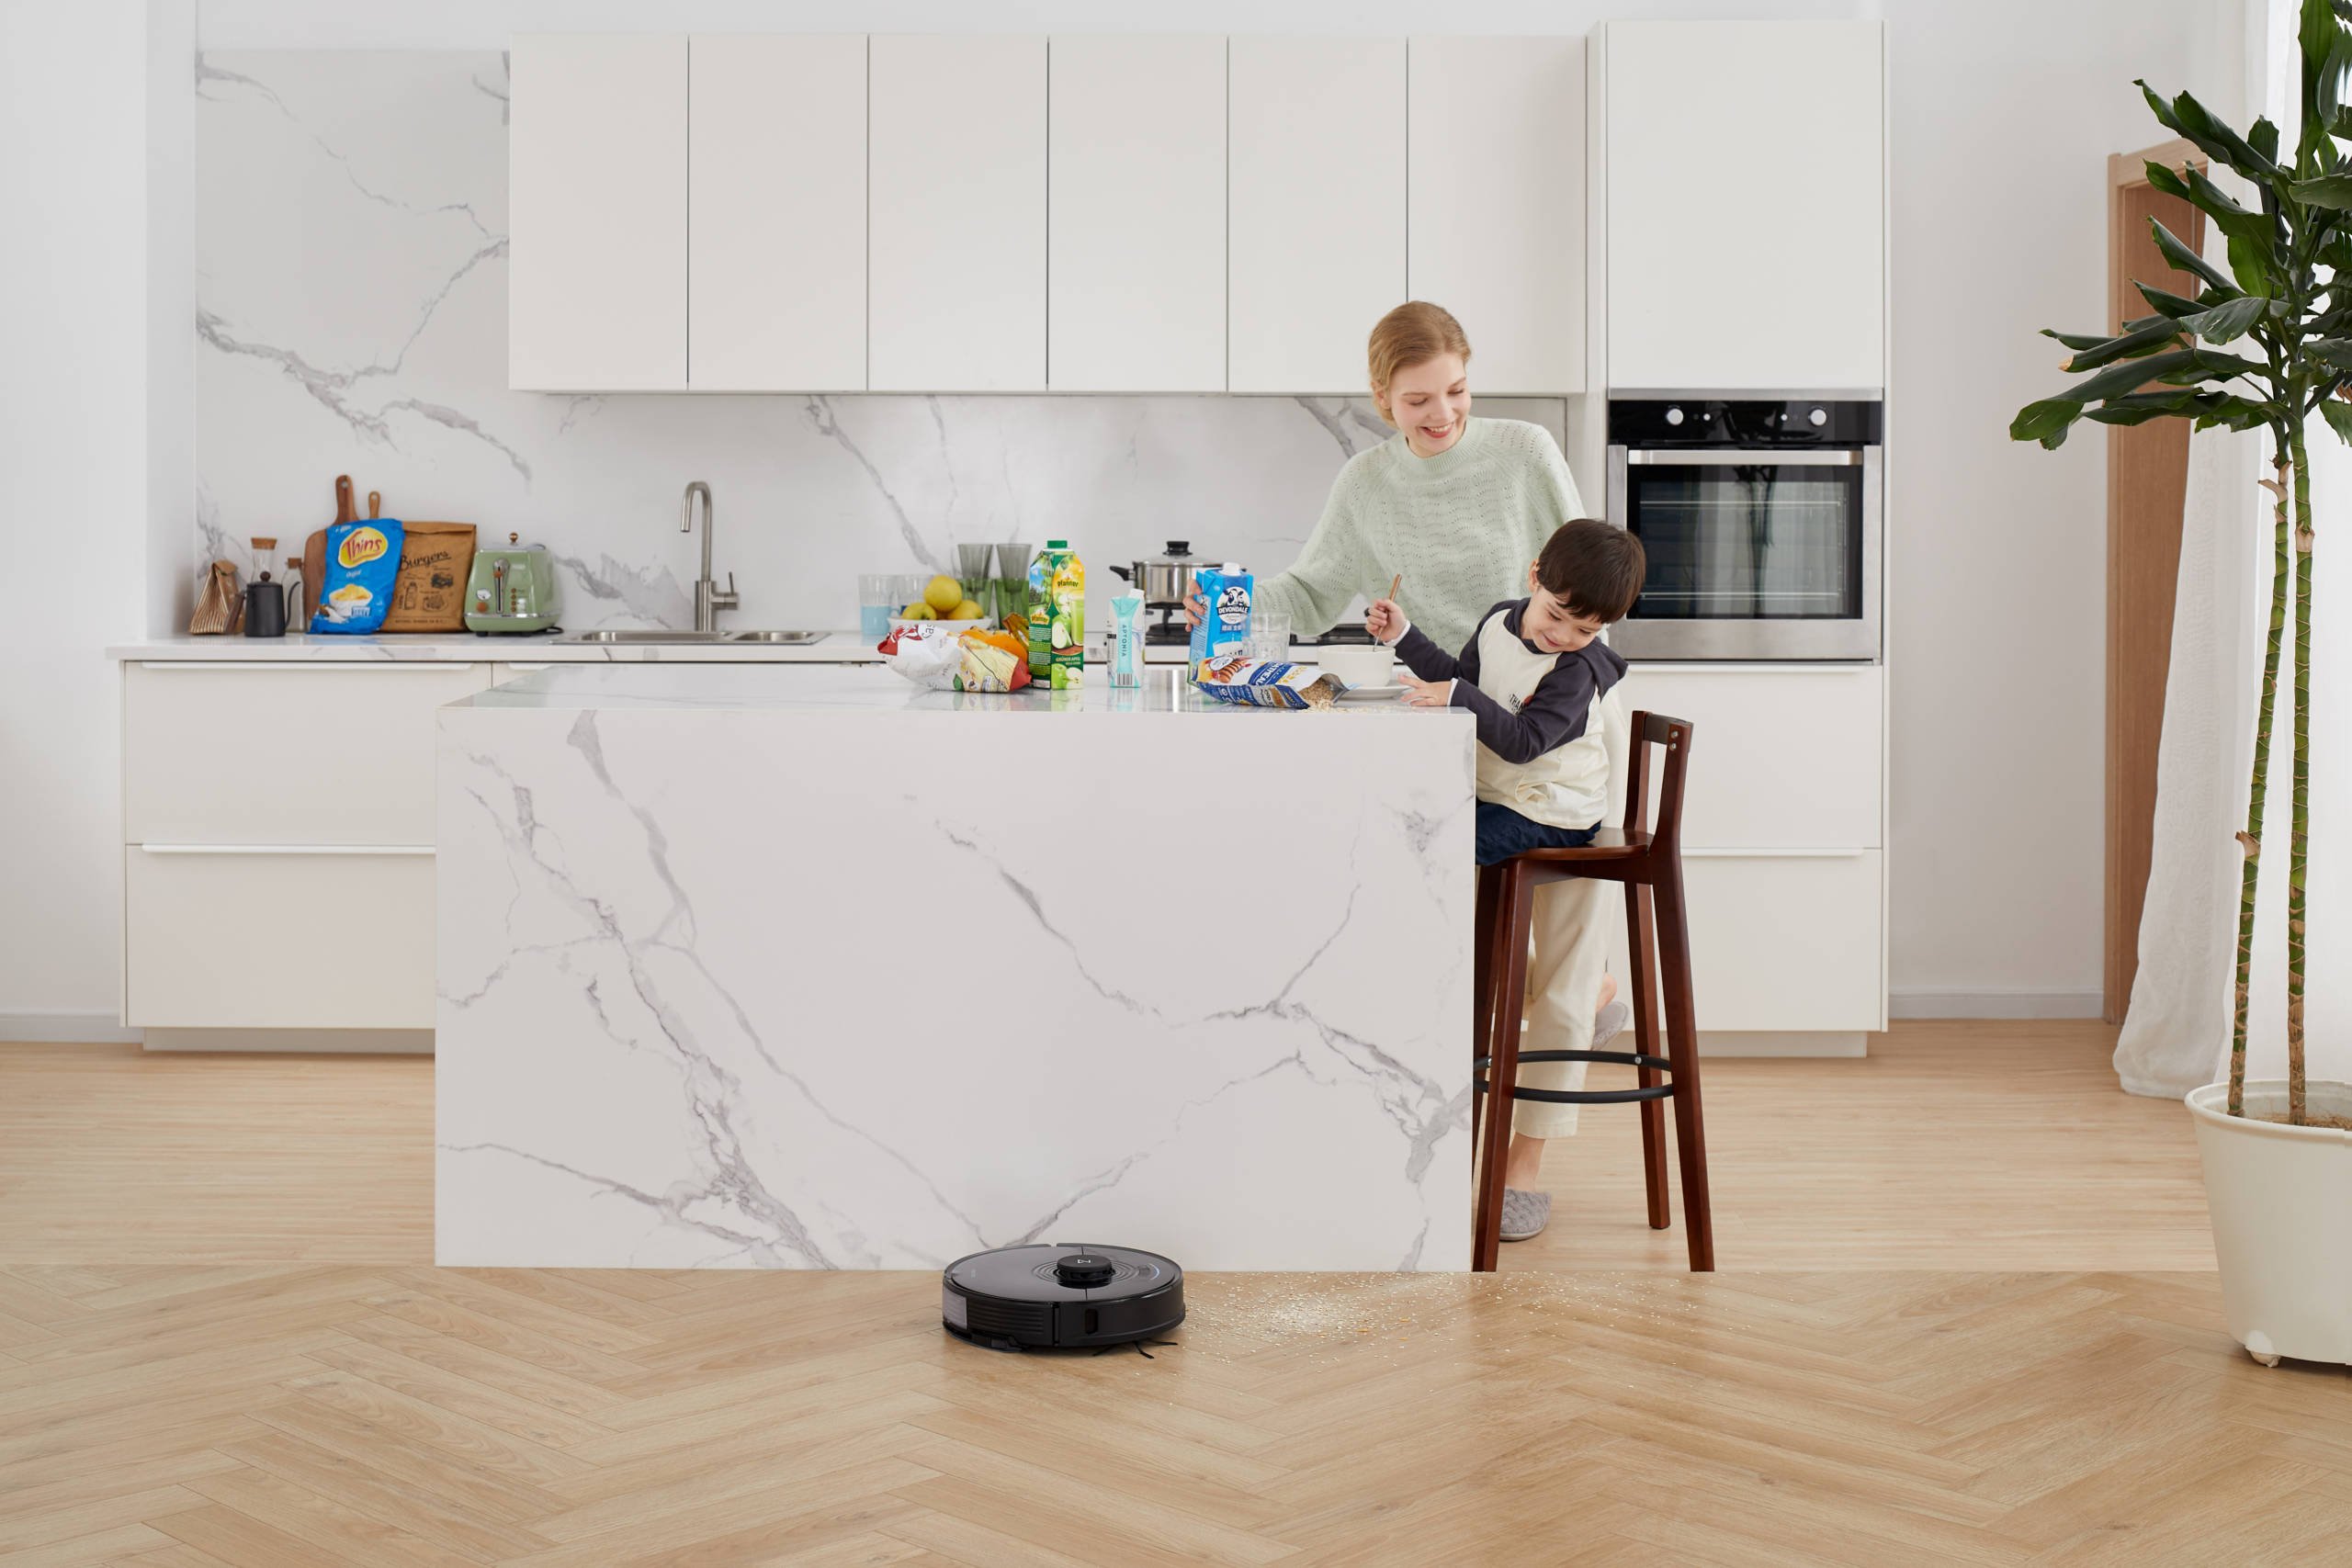 There’s No Better Time to Upgrade to a Roborock S7 Robot Vacuum & Mop